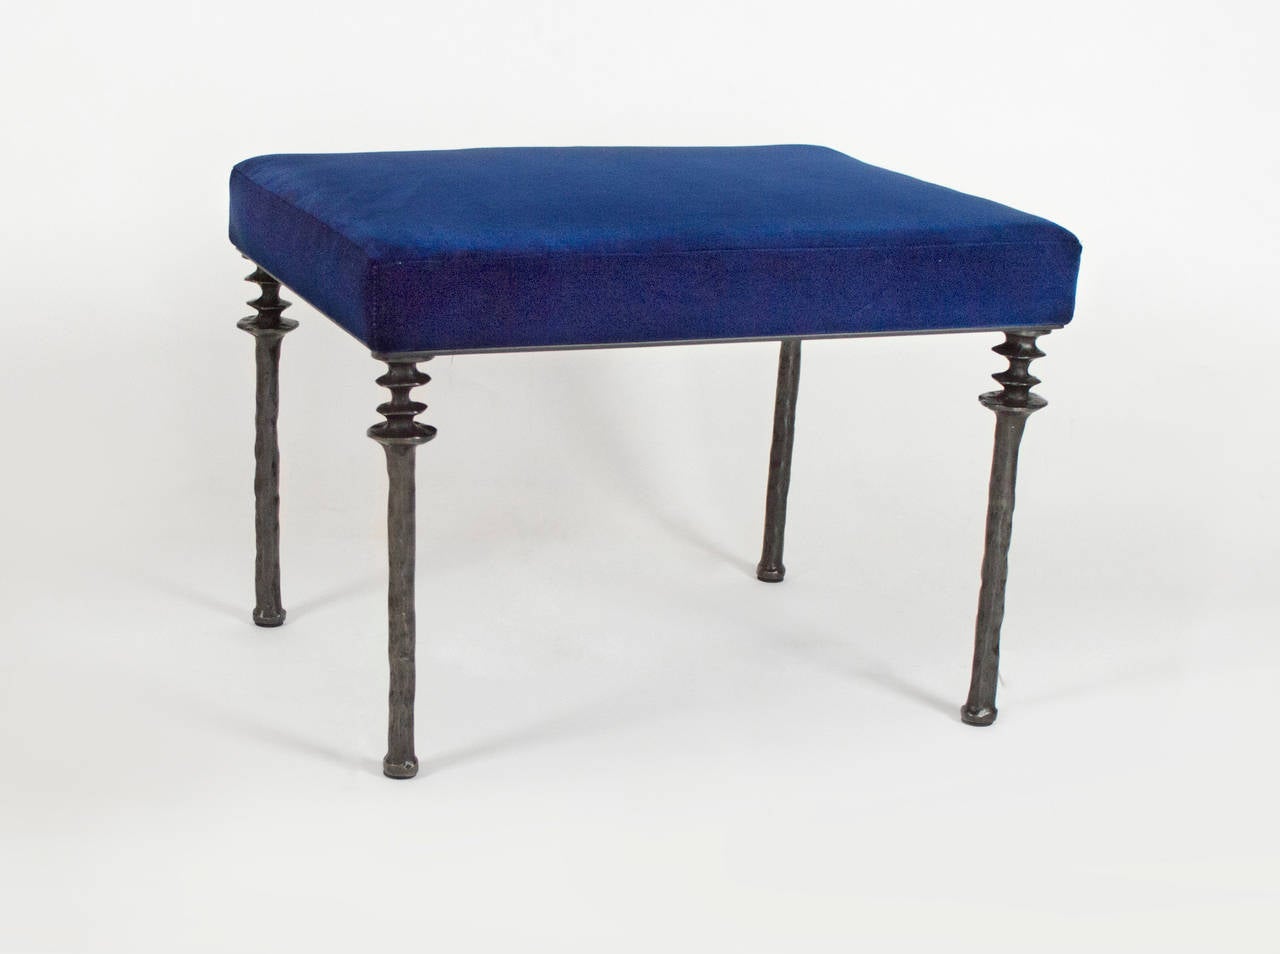 Two unique stools with cast bronze legs and royal blue velvet cushion.  These stools are located in our space in the 1STDIBS@NYDC showroom in NYC.